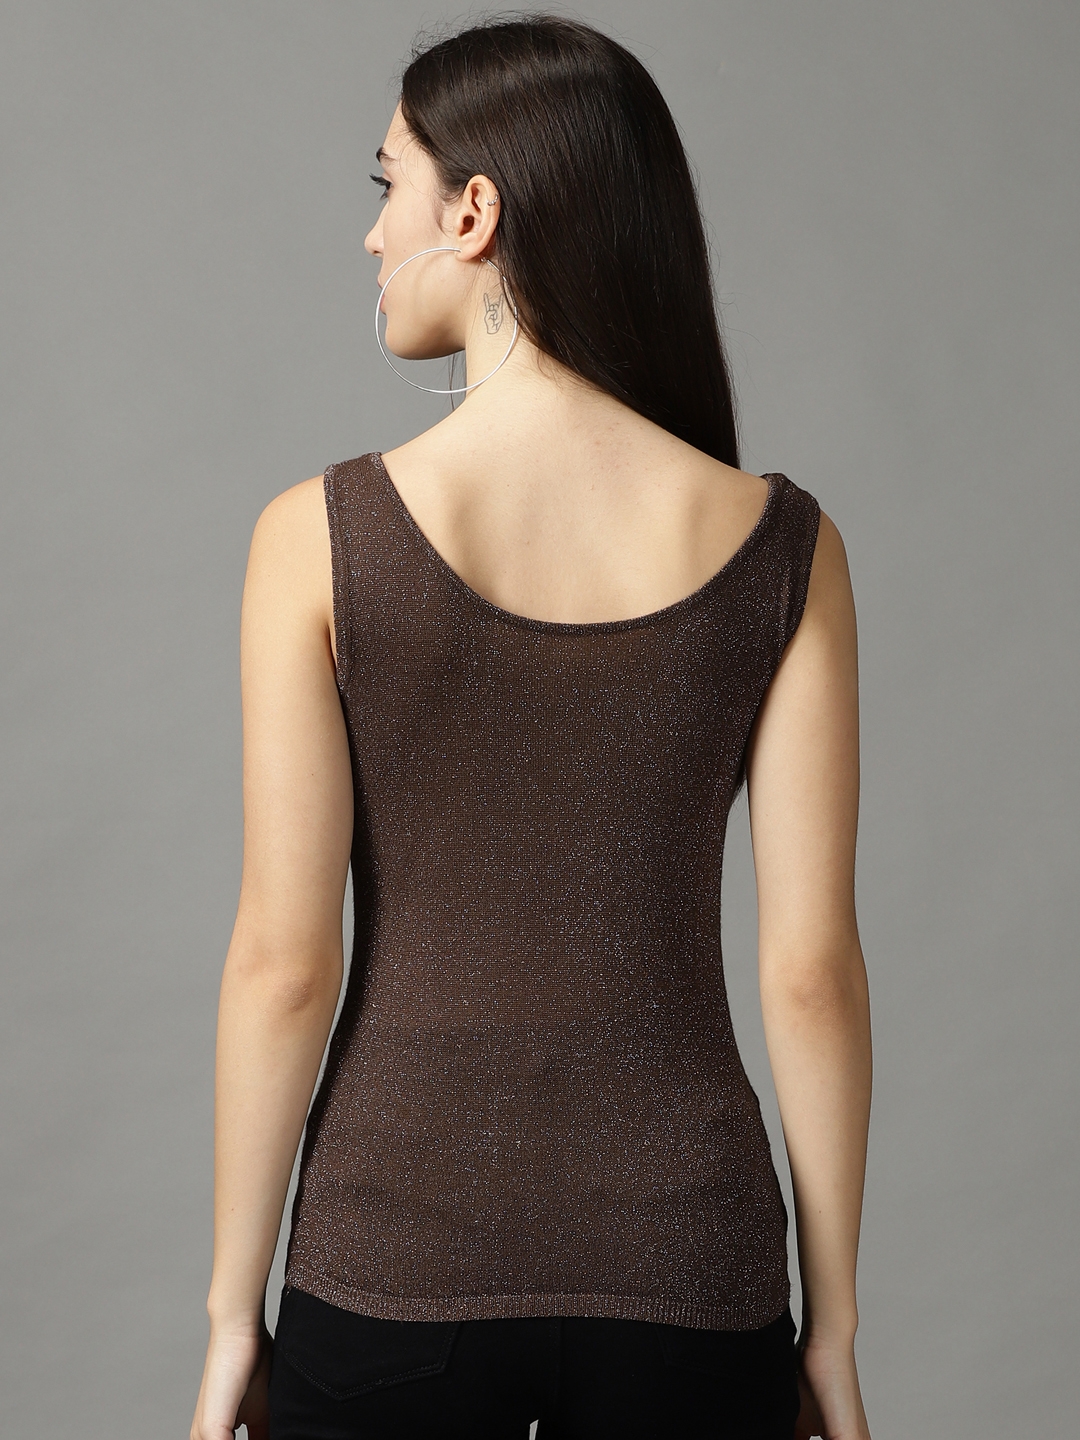 Women's Brown Cotton Blend Solid Tops